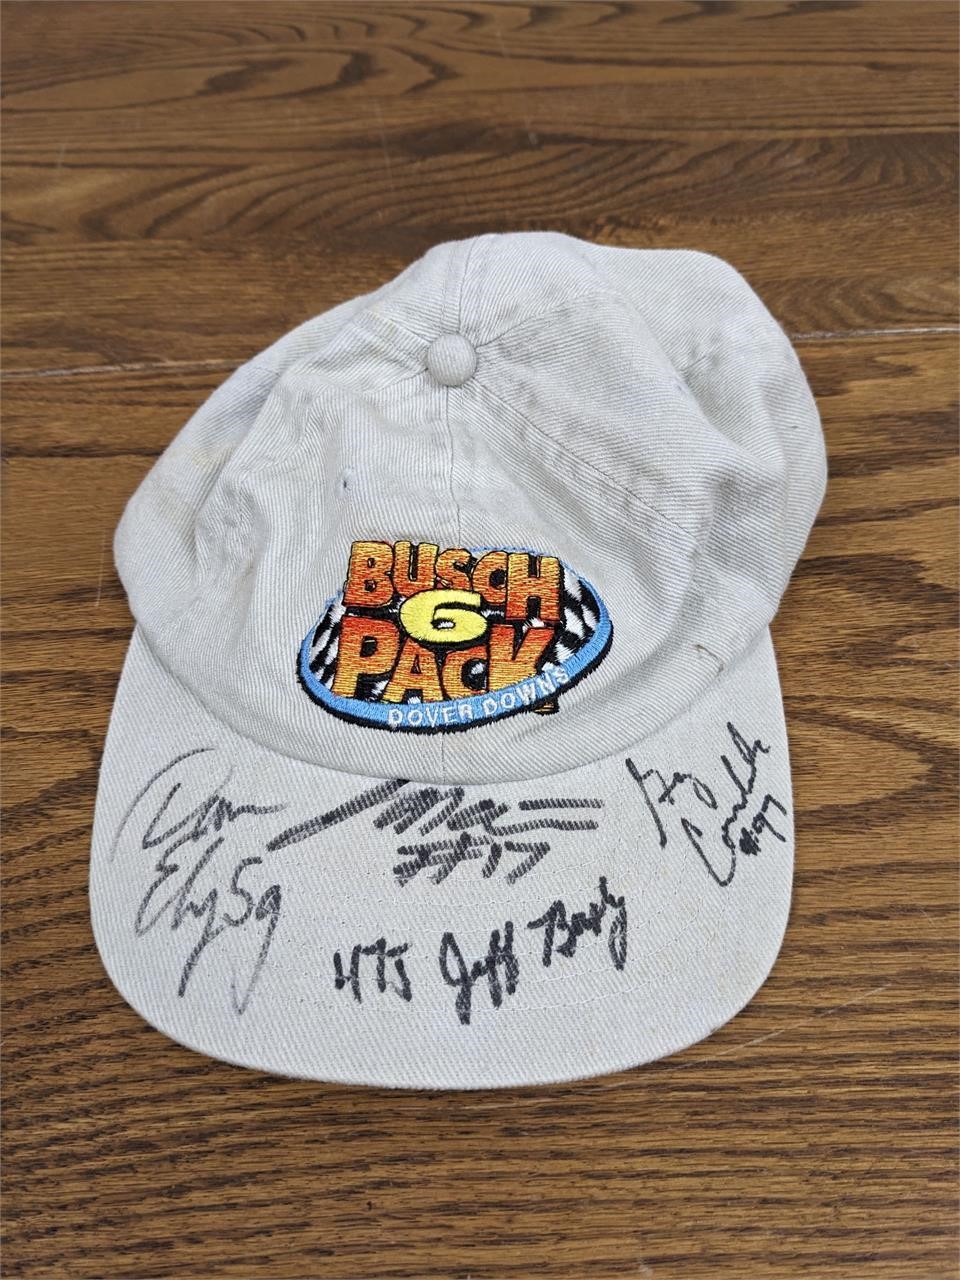 Dover Downs Busch 6 Pack Autographed Hat